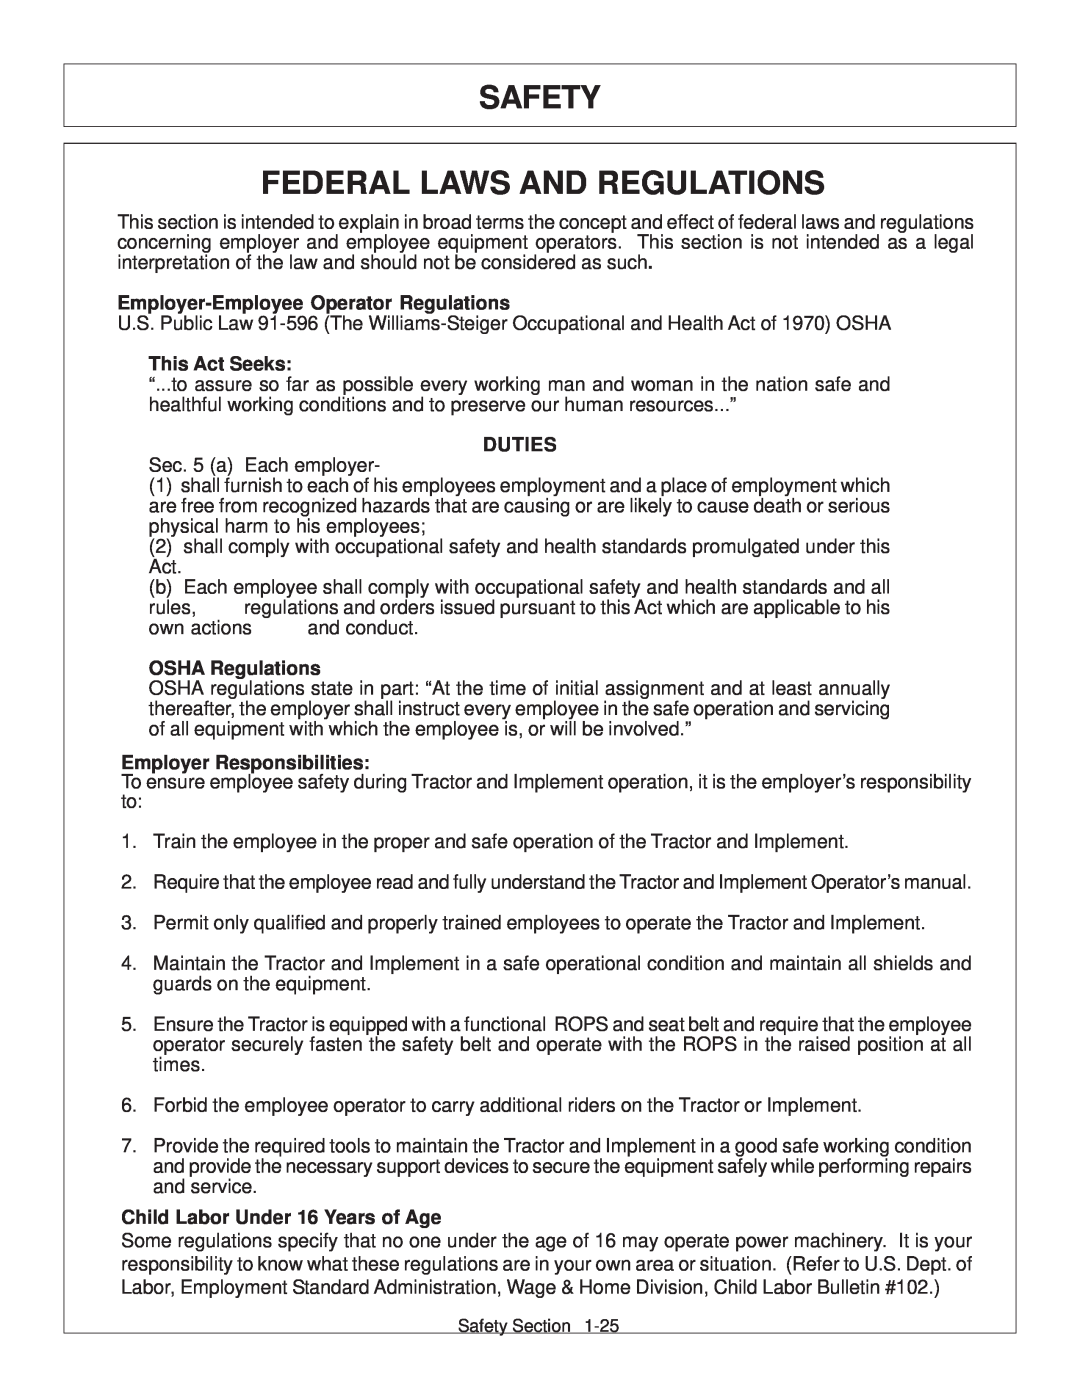 Tiger JD 62-6420 manual Safety Federal Laws And Regulations, Employer-Employee Operator Regulations, This Act Seeks, Duties 